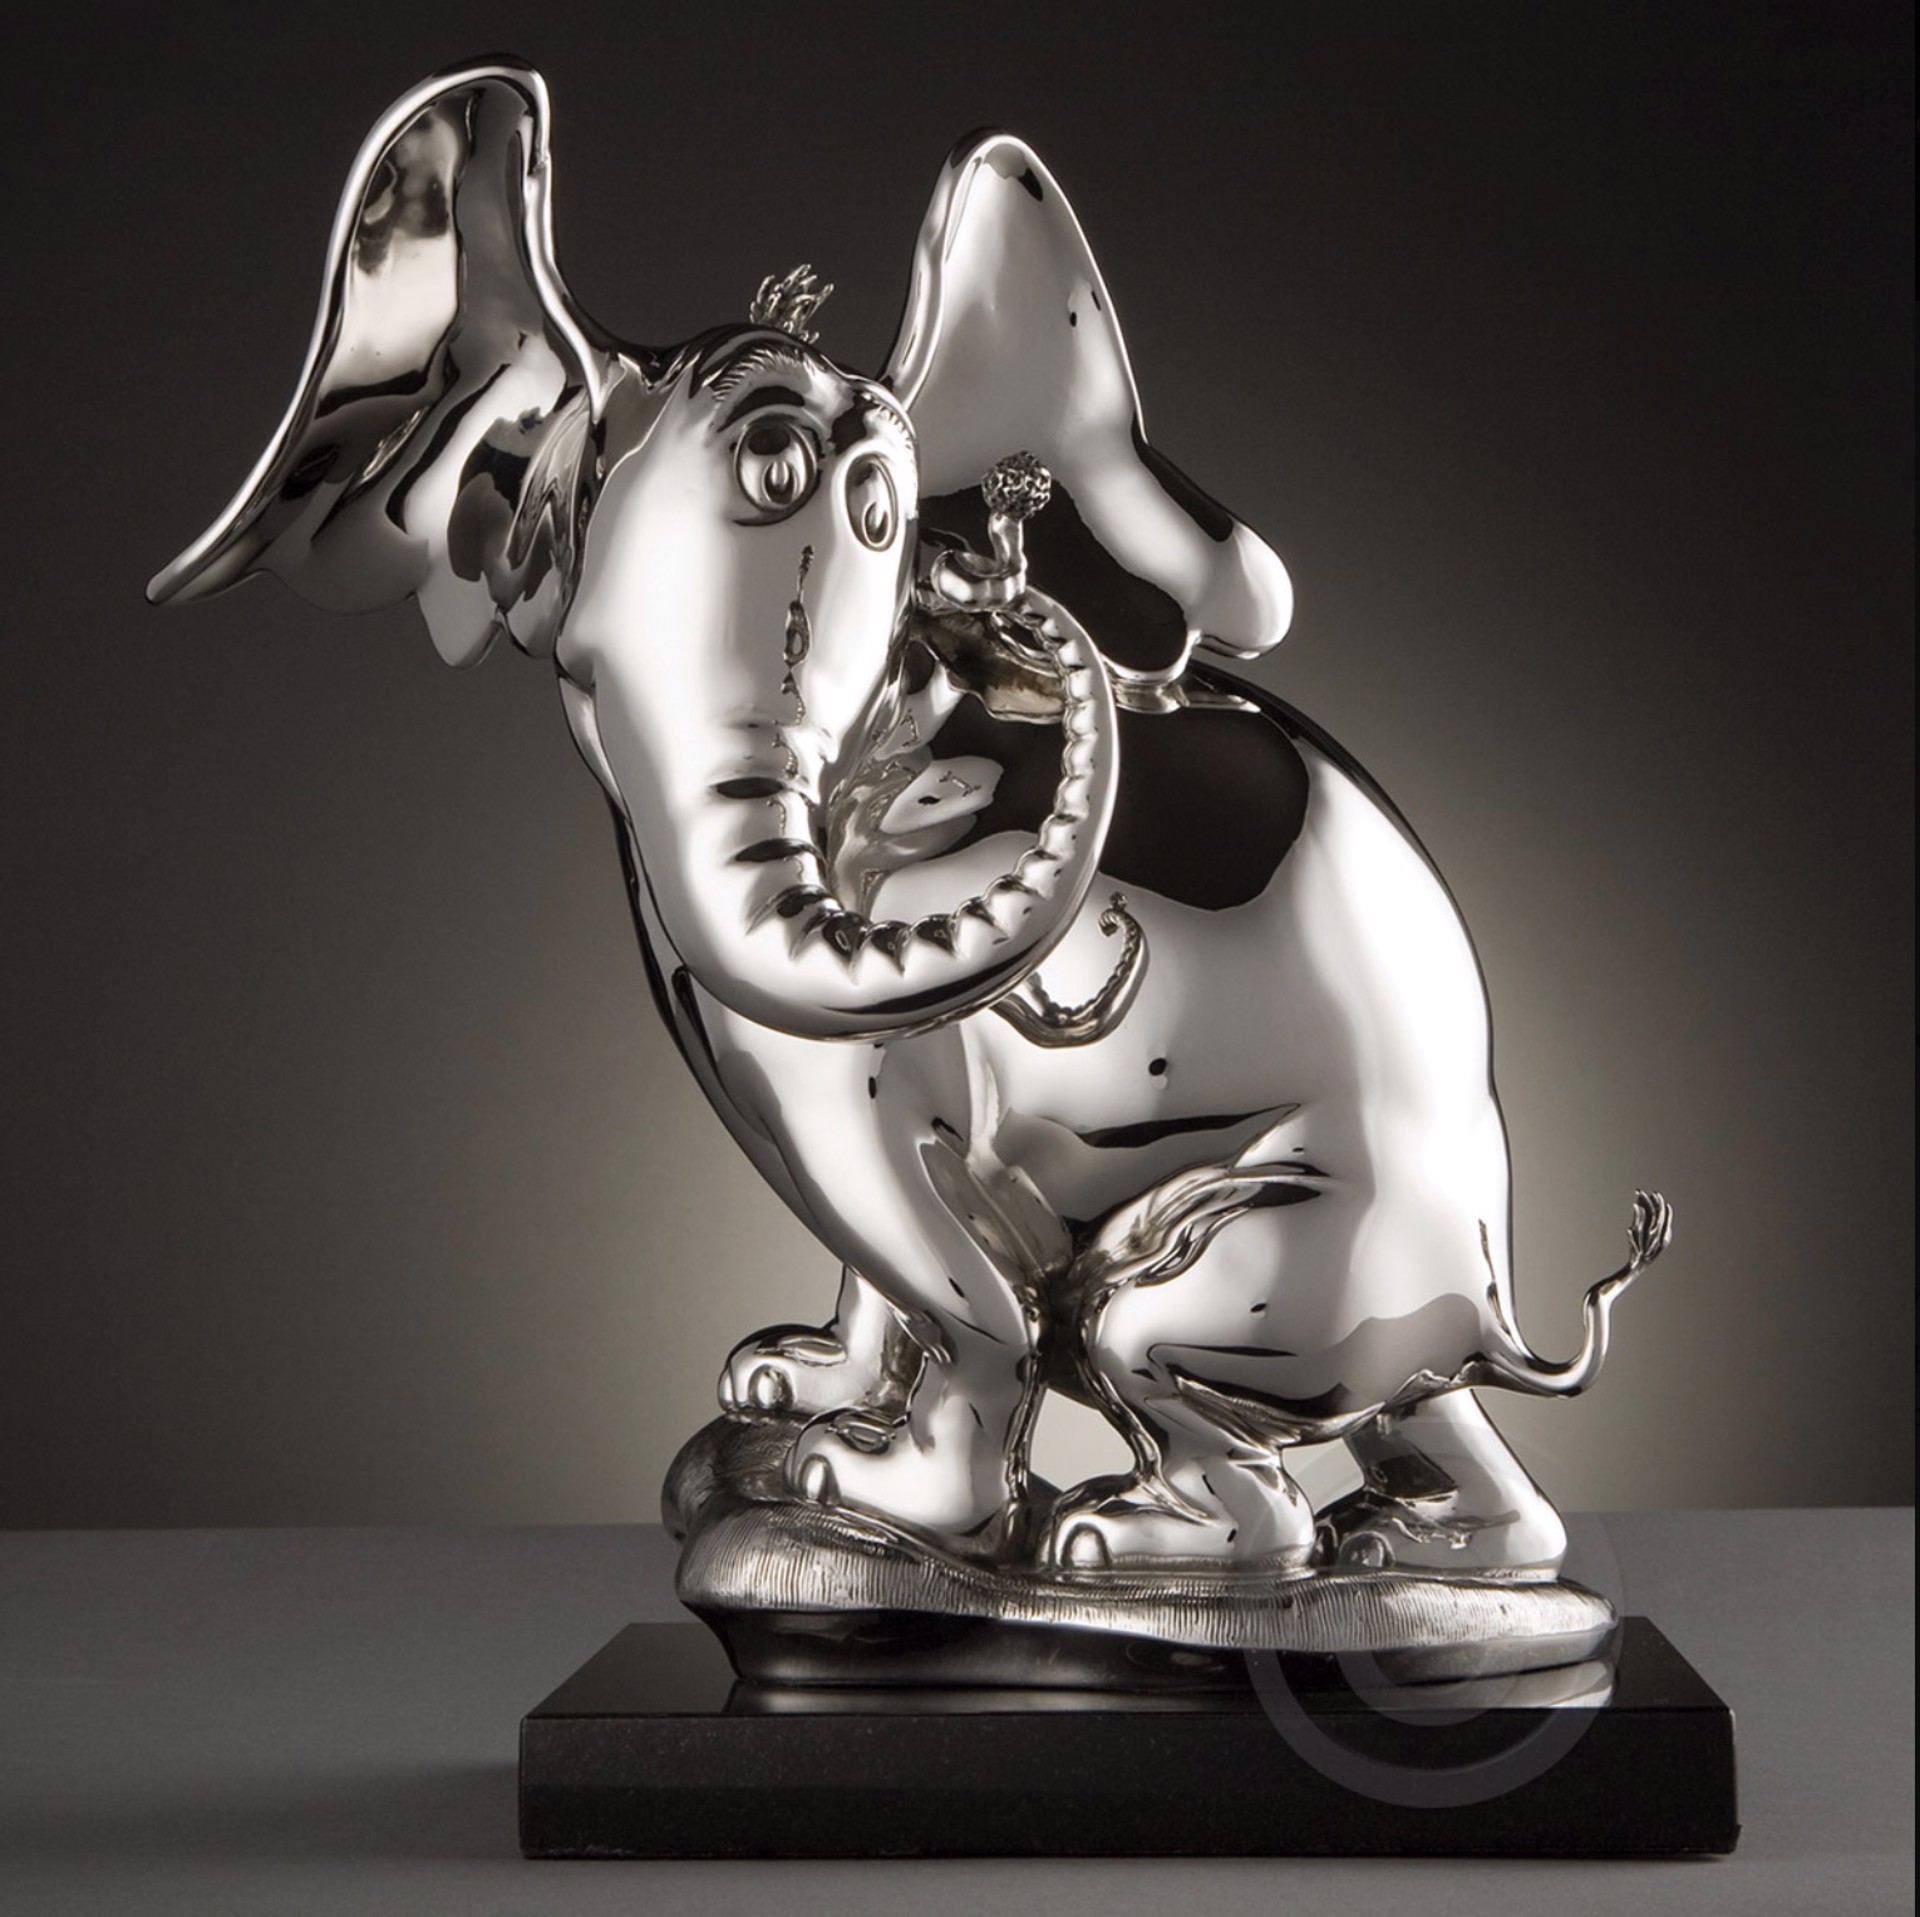 HORTON - MAQUETTE, STAINLESS STEEL by Dr. Seuss